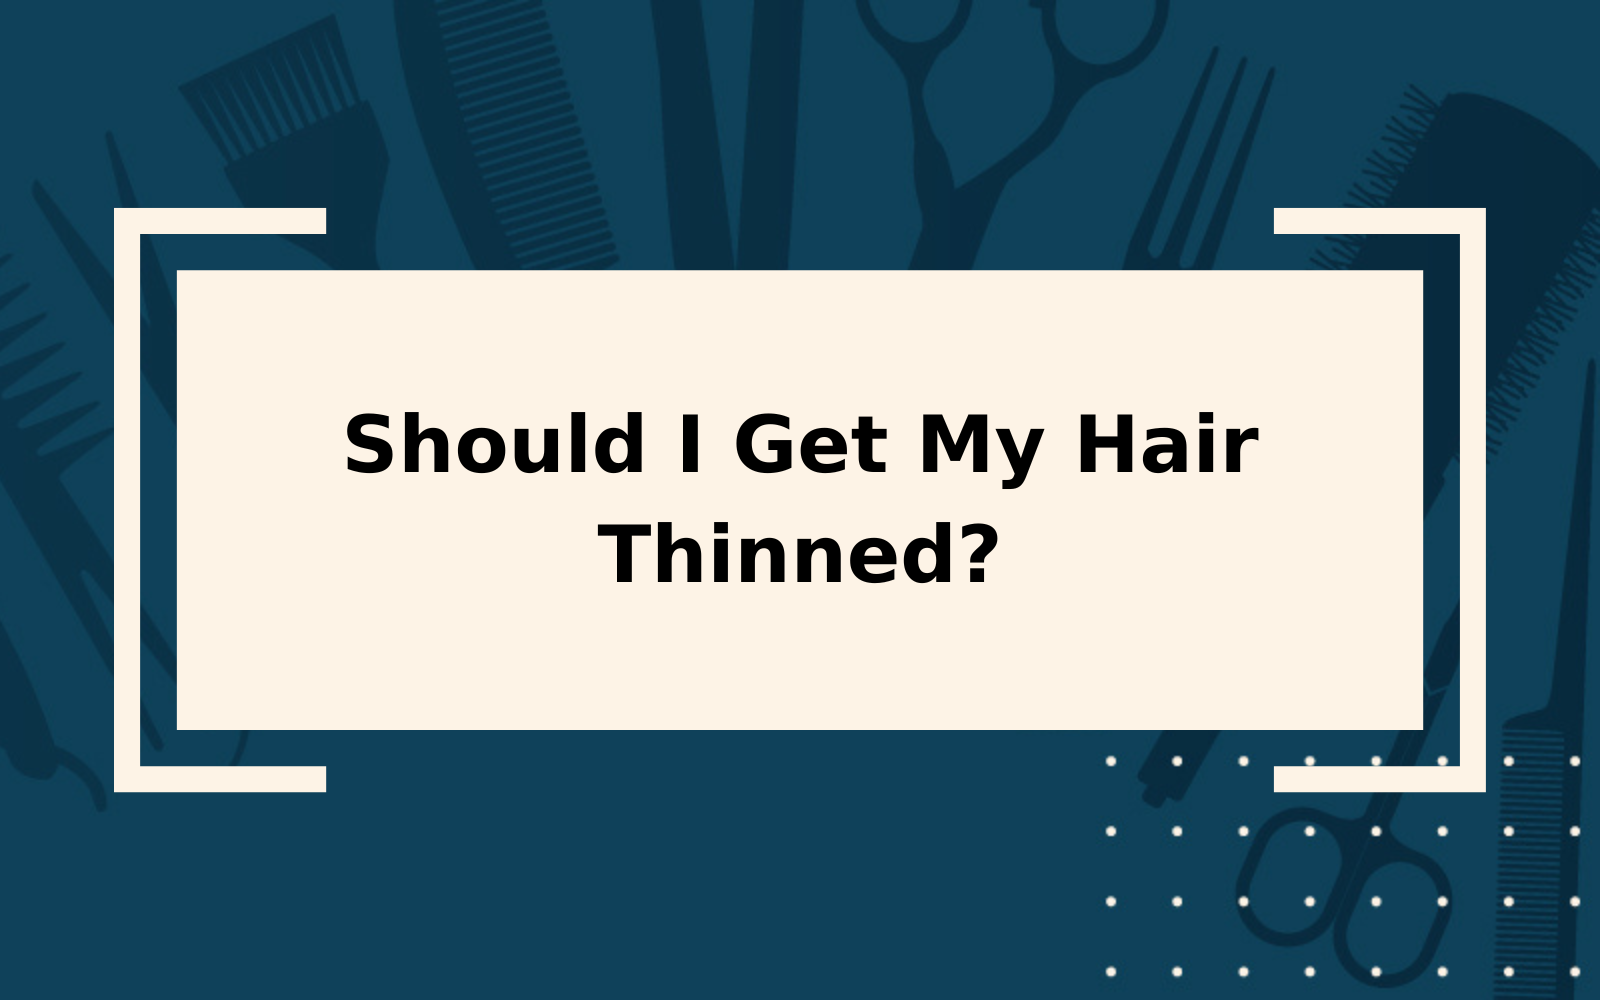 Should I Get My Hair Thinned? | We’ll Help You Decide